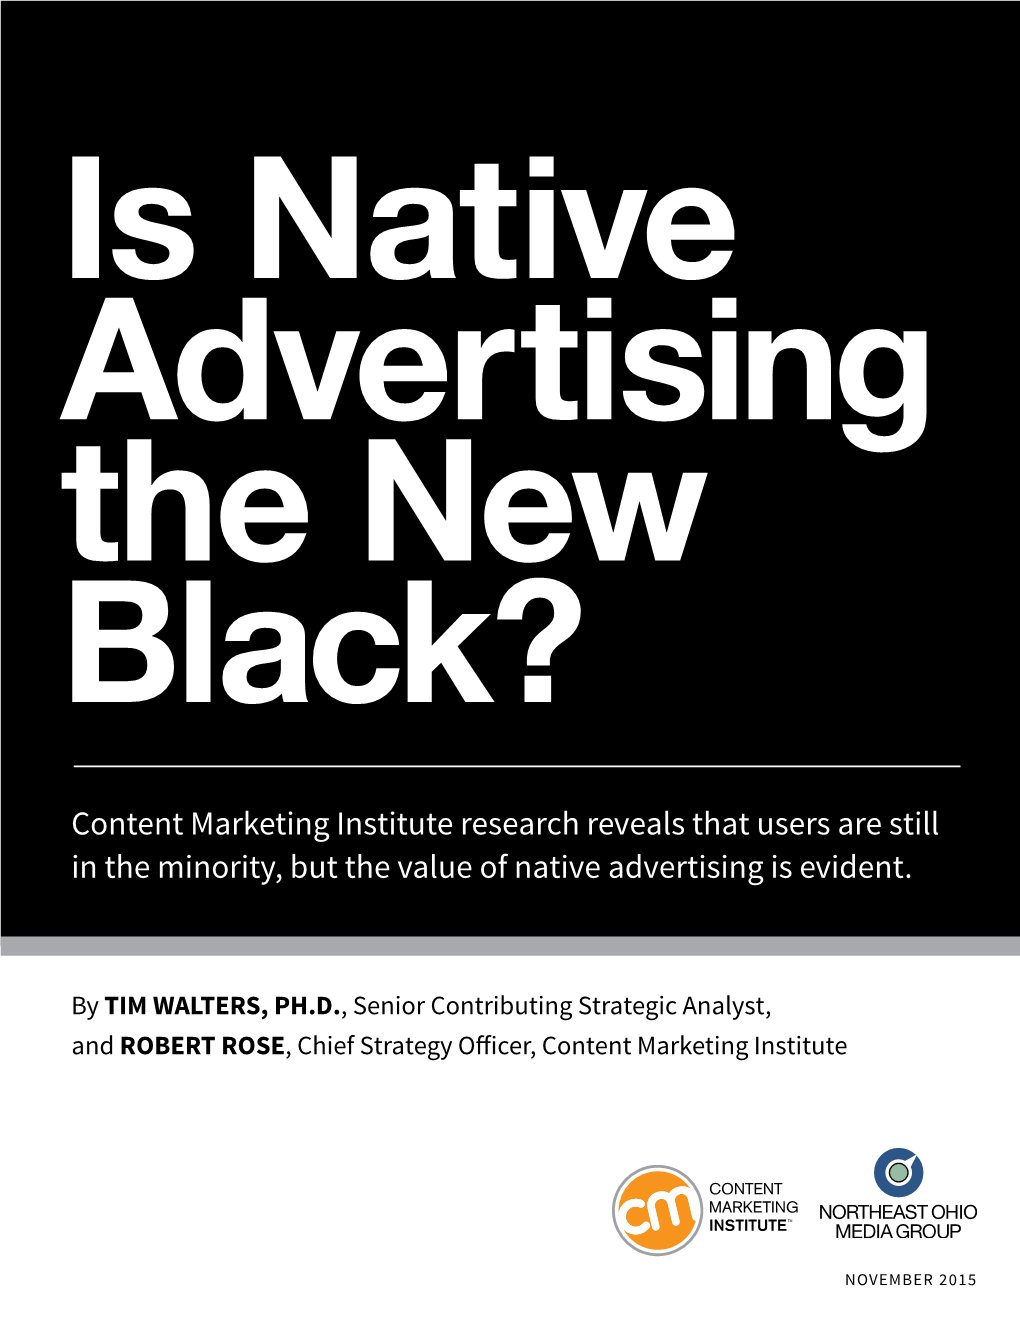 Content Marketing Institute Research Reveals That Users Are Still in the Minority, but the Value of Native Advertising Is Evident